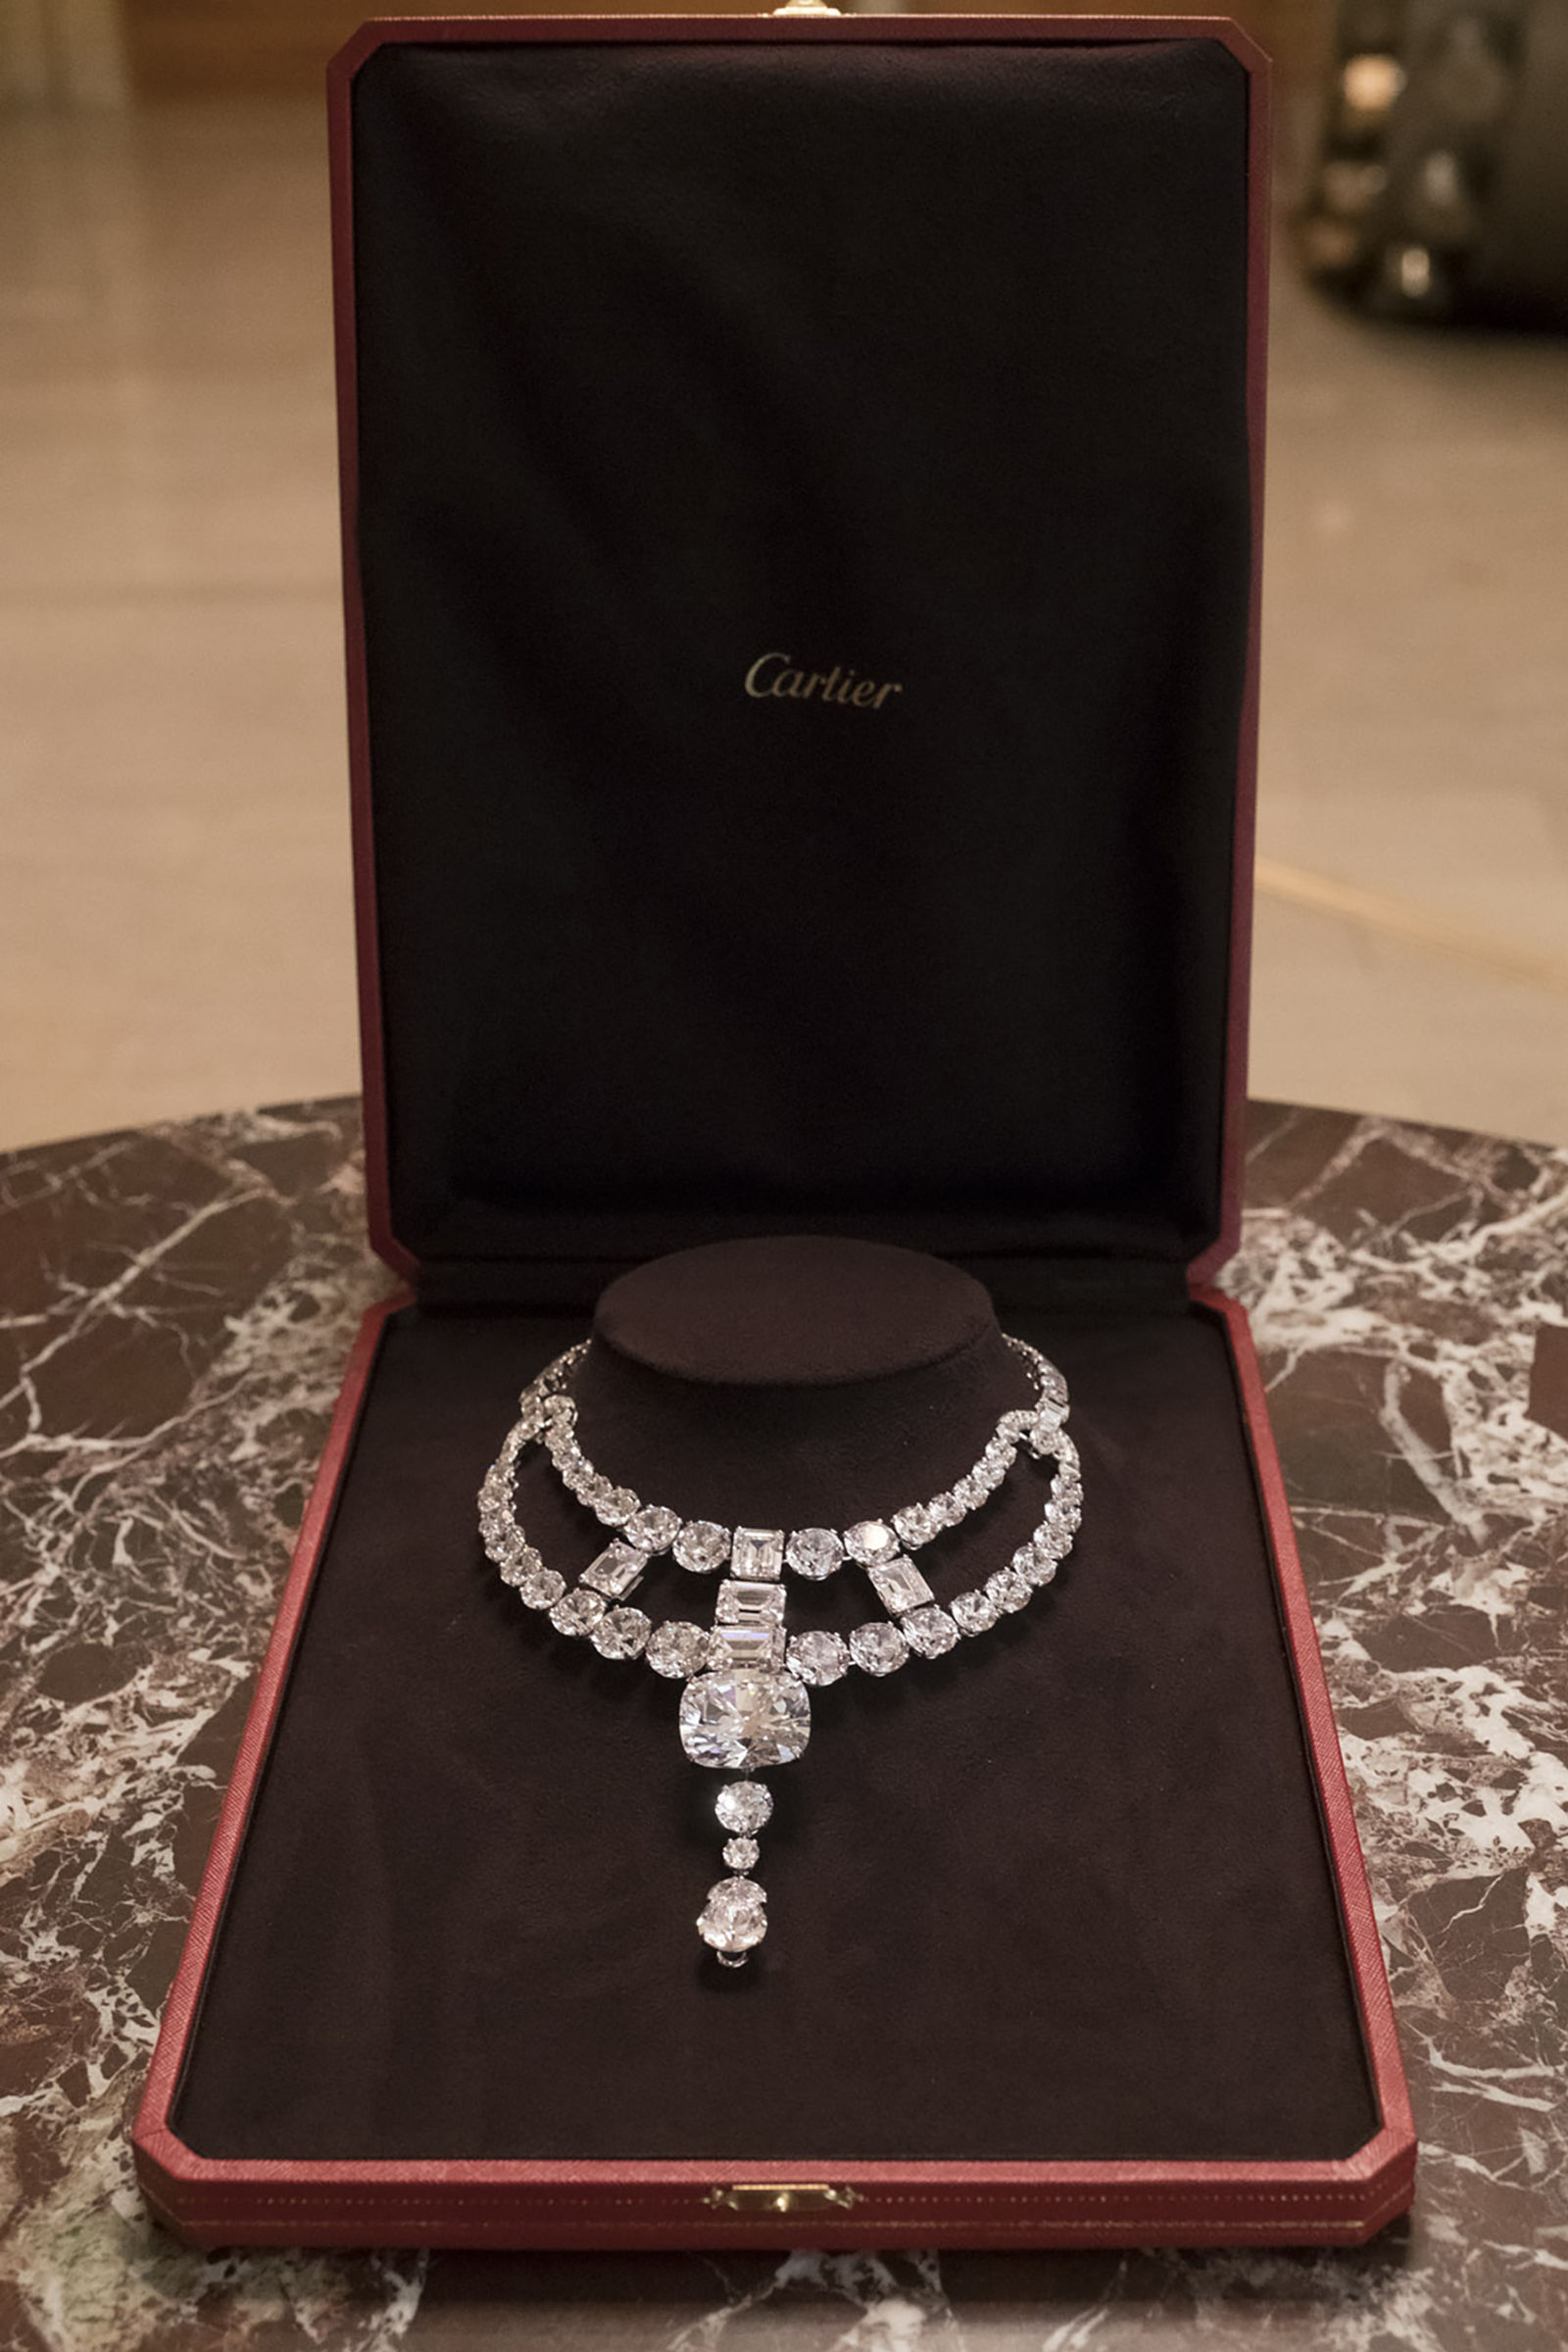 On the rocks: Cartier’s Jeanne Toussaint necklace that took centre stage in Ocean’s 8